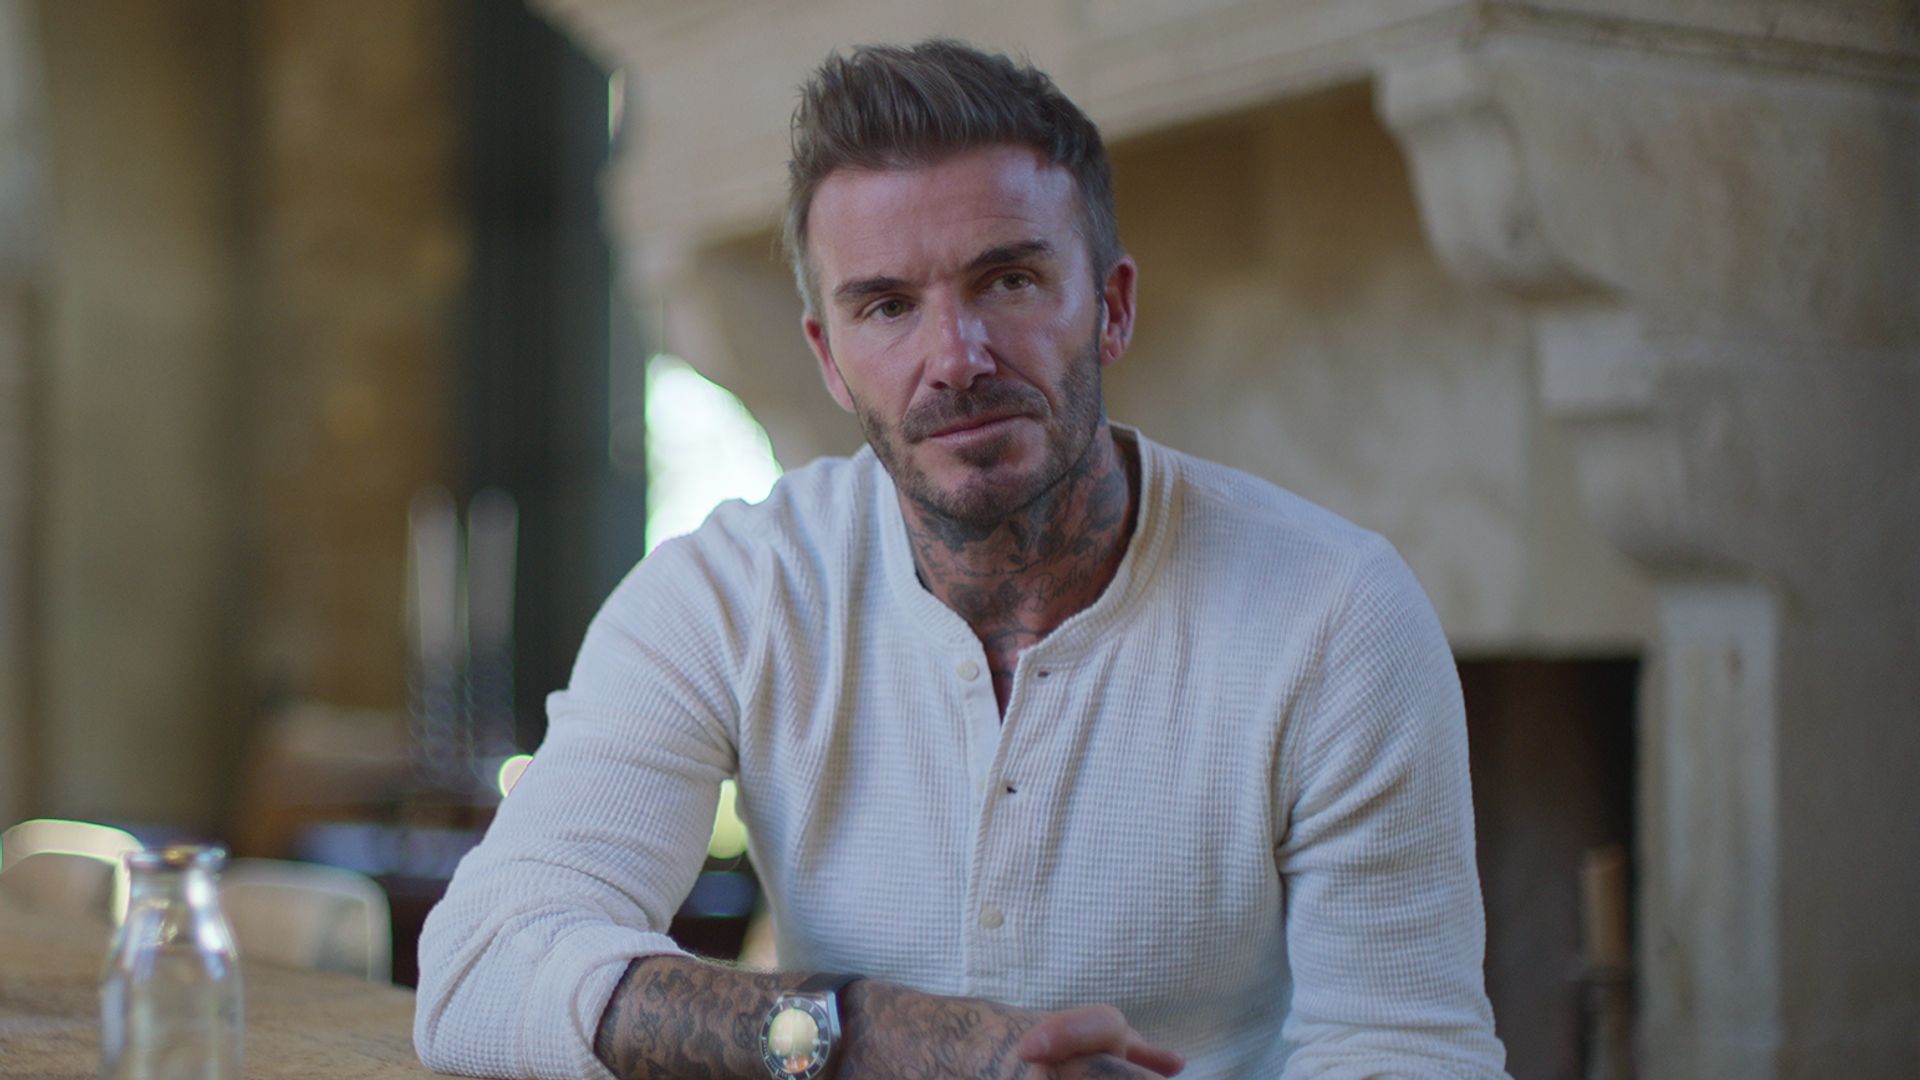 David Beckham takes family to premiere of candid new Netflix documentary  about his life, players netflix 2023 